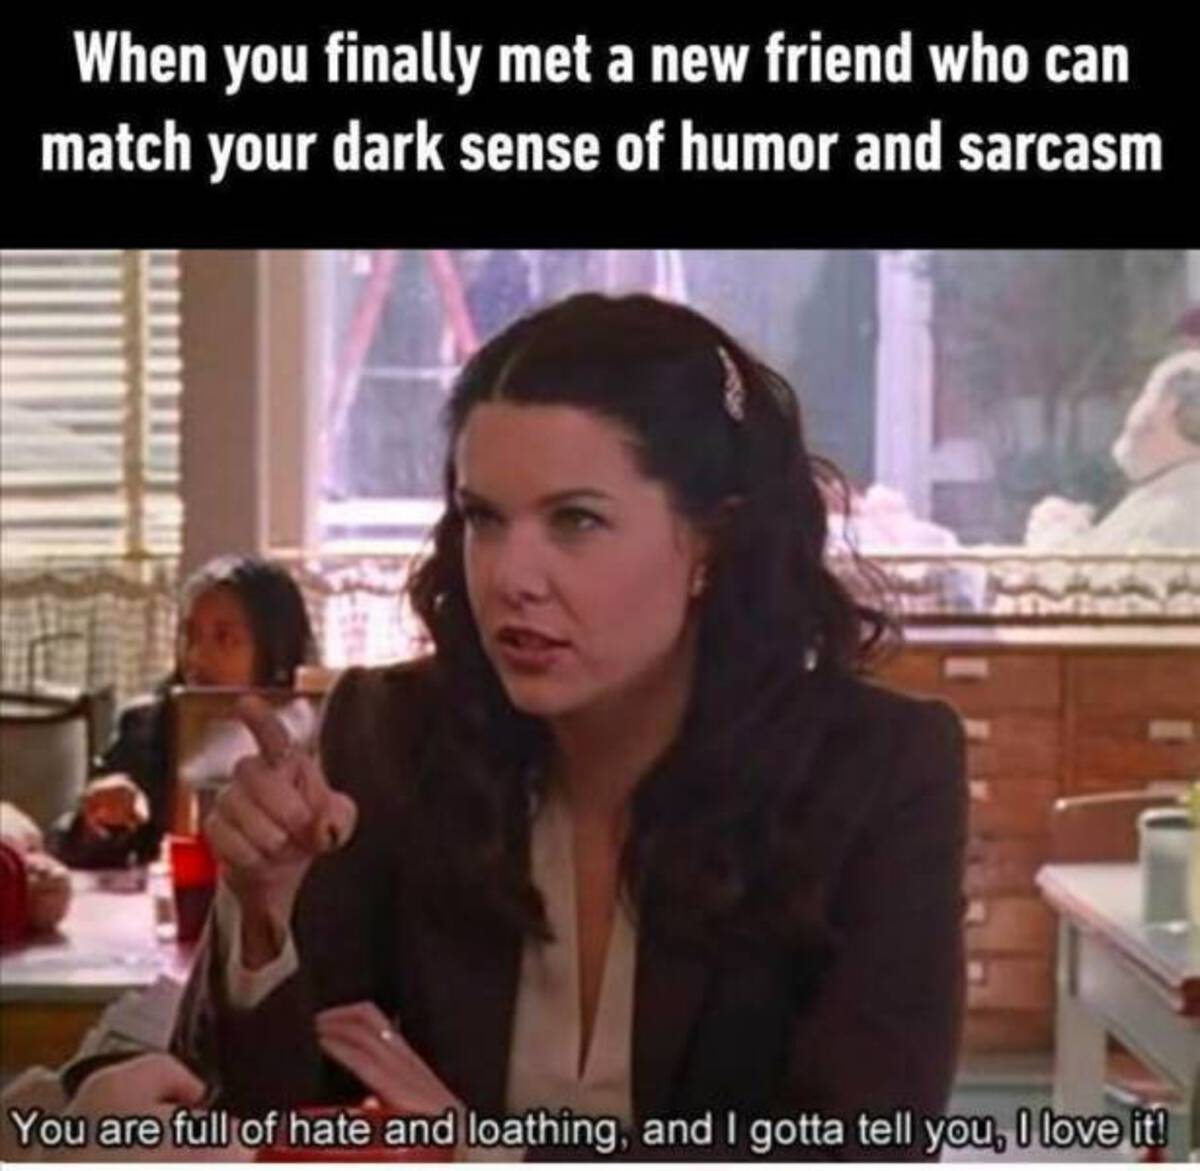 lorelai gilmore - When you finally met a new friend who can match your dark sense of humor and sarcasm You are full of hate and loathing, and I gotta tell you, I love it!